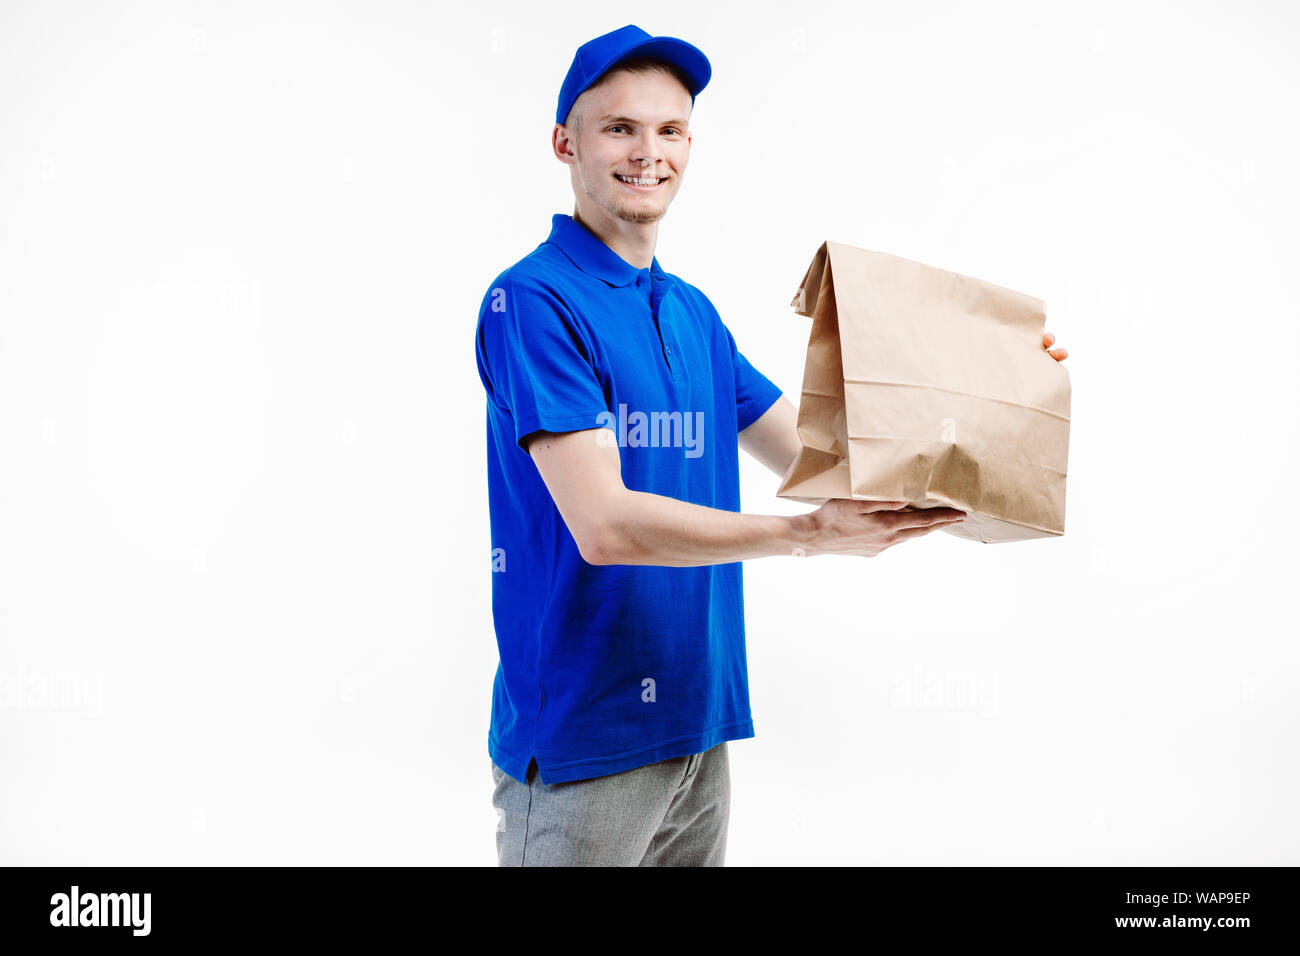 Delivery guy ships a big order to the adress written and smiles at the client friendly. Stock Photo